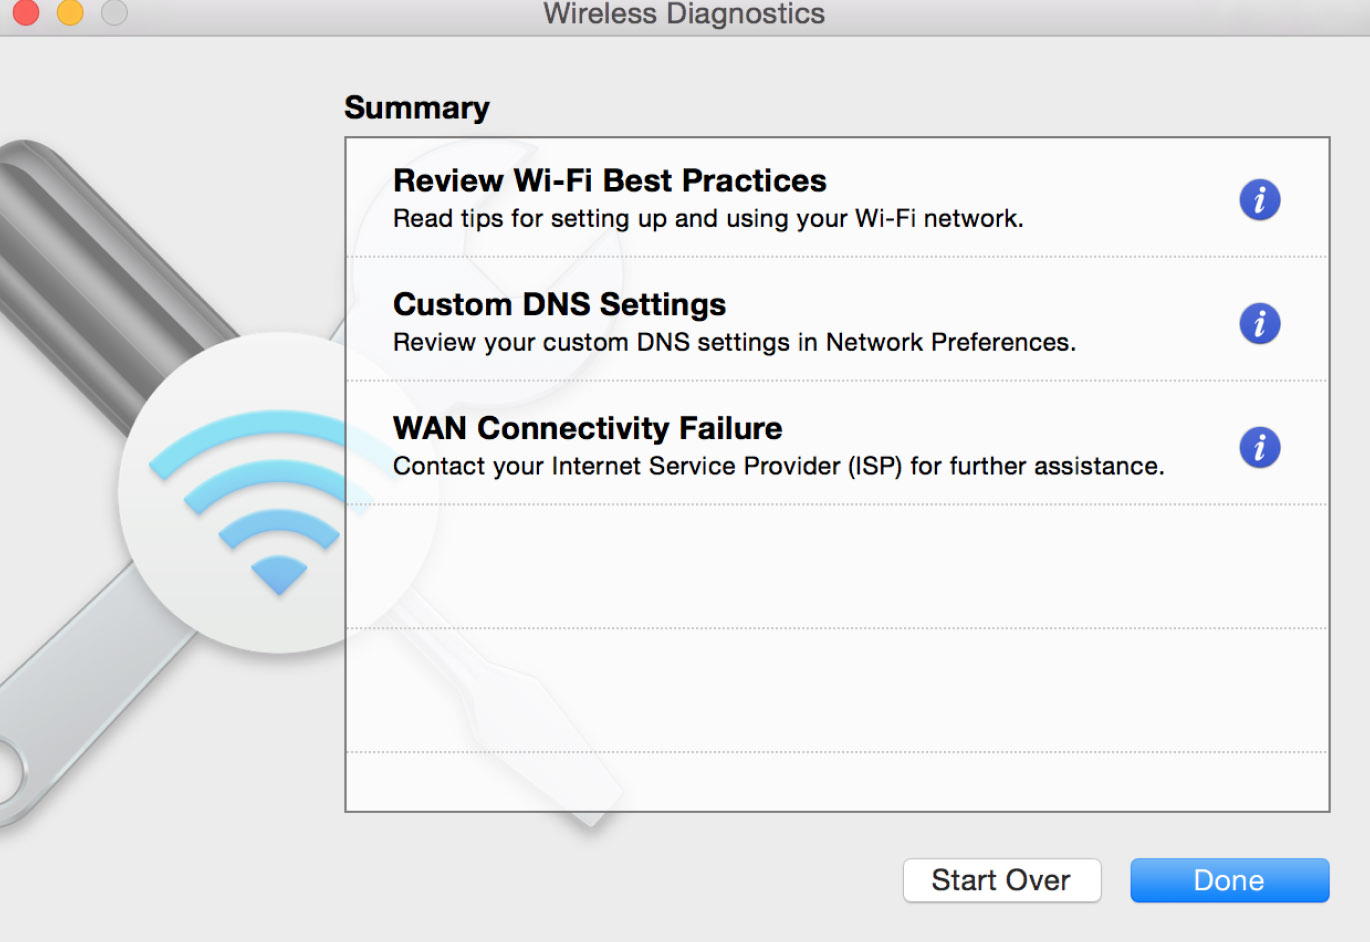 best network utility for mac